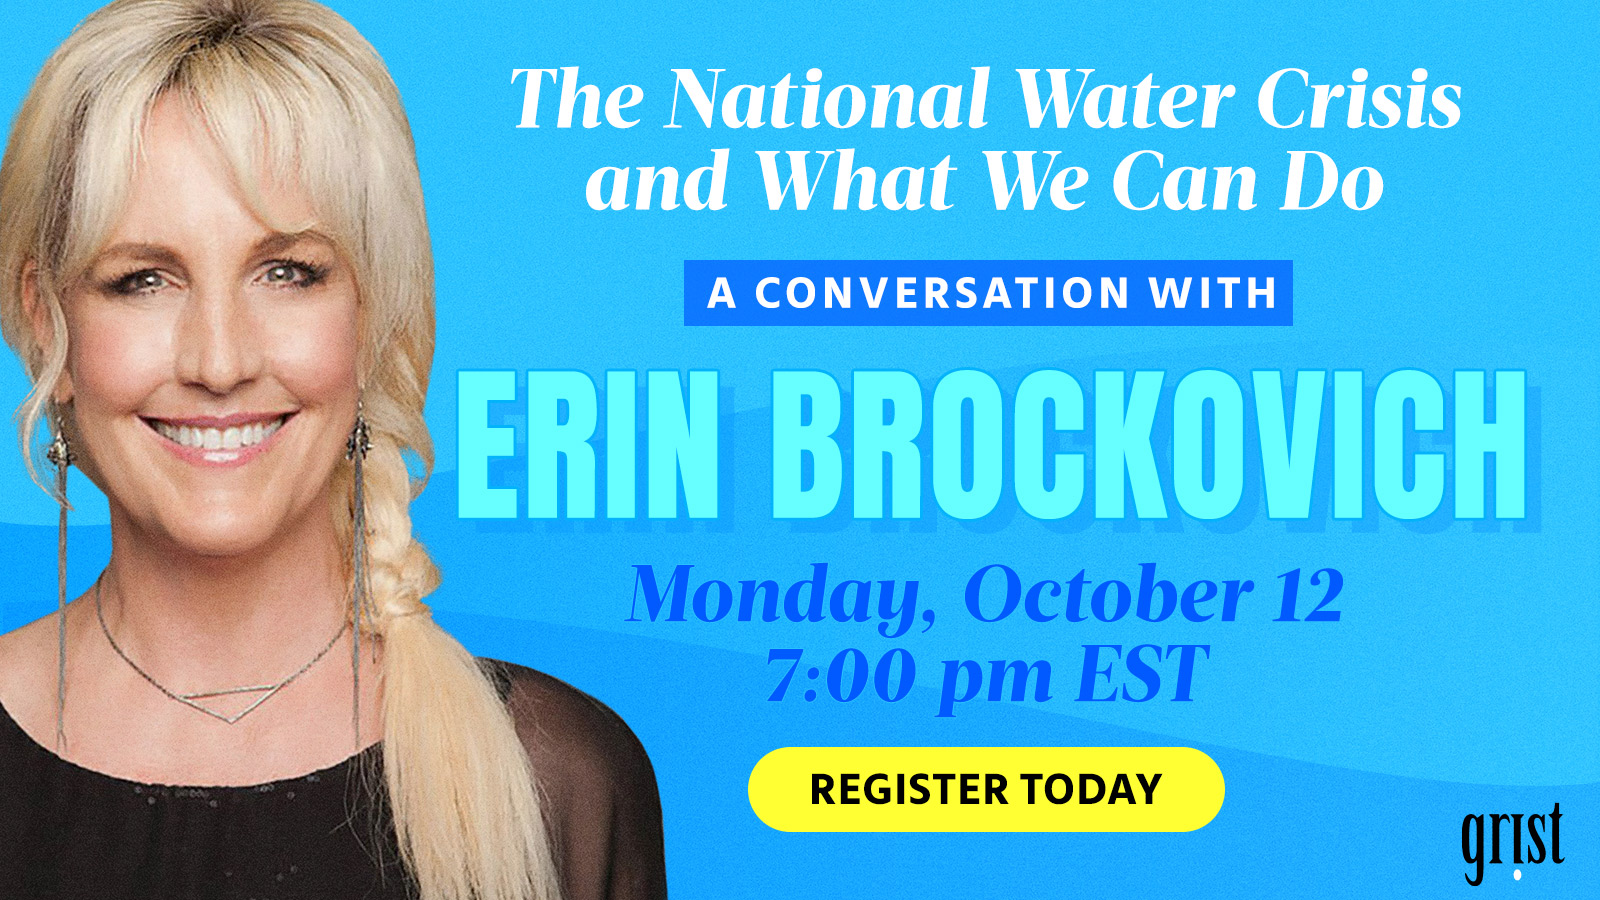 A live chat with Erin Brockovich! Register today. - Grist